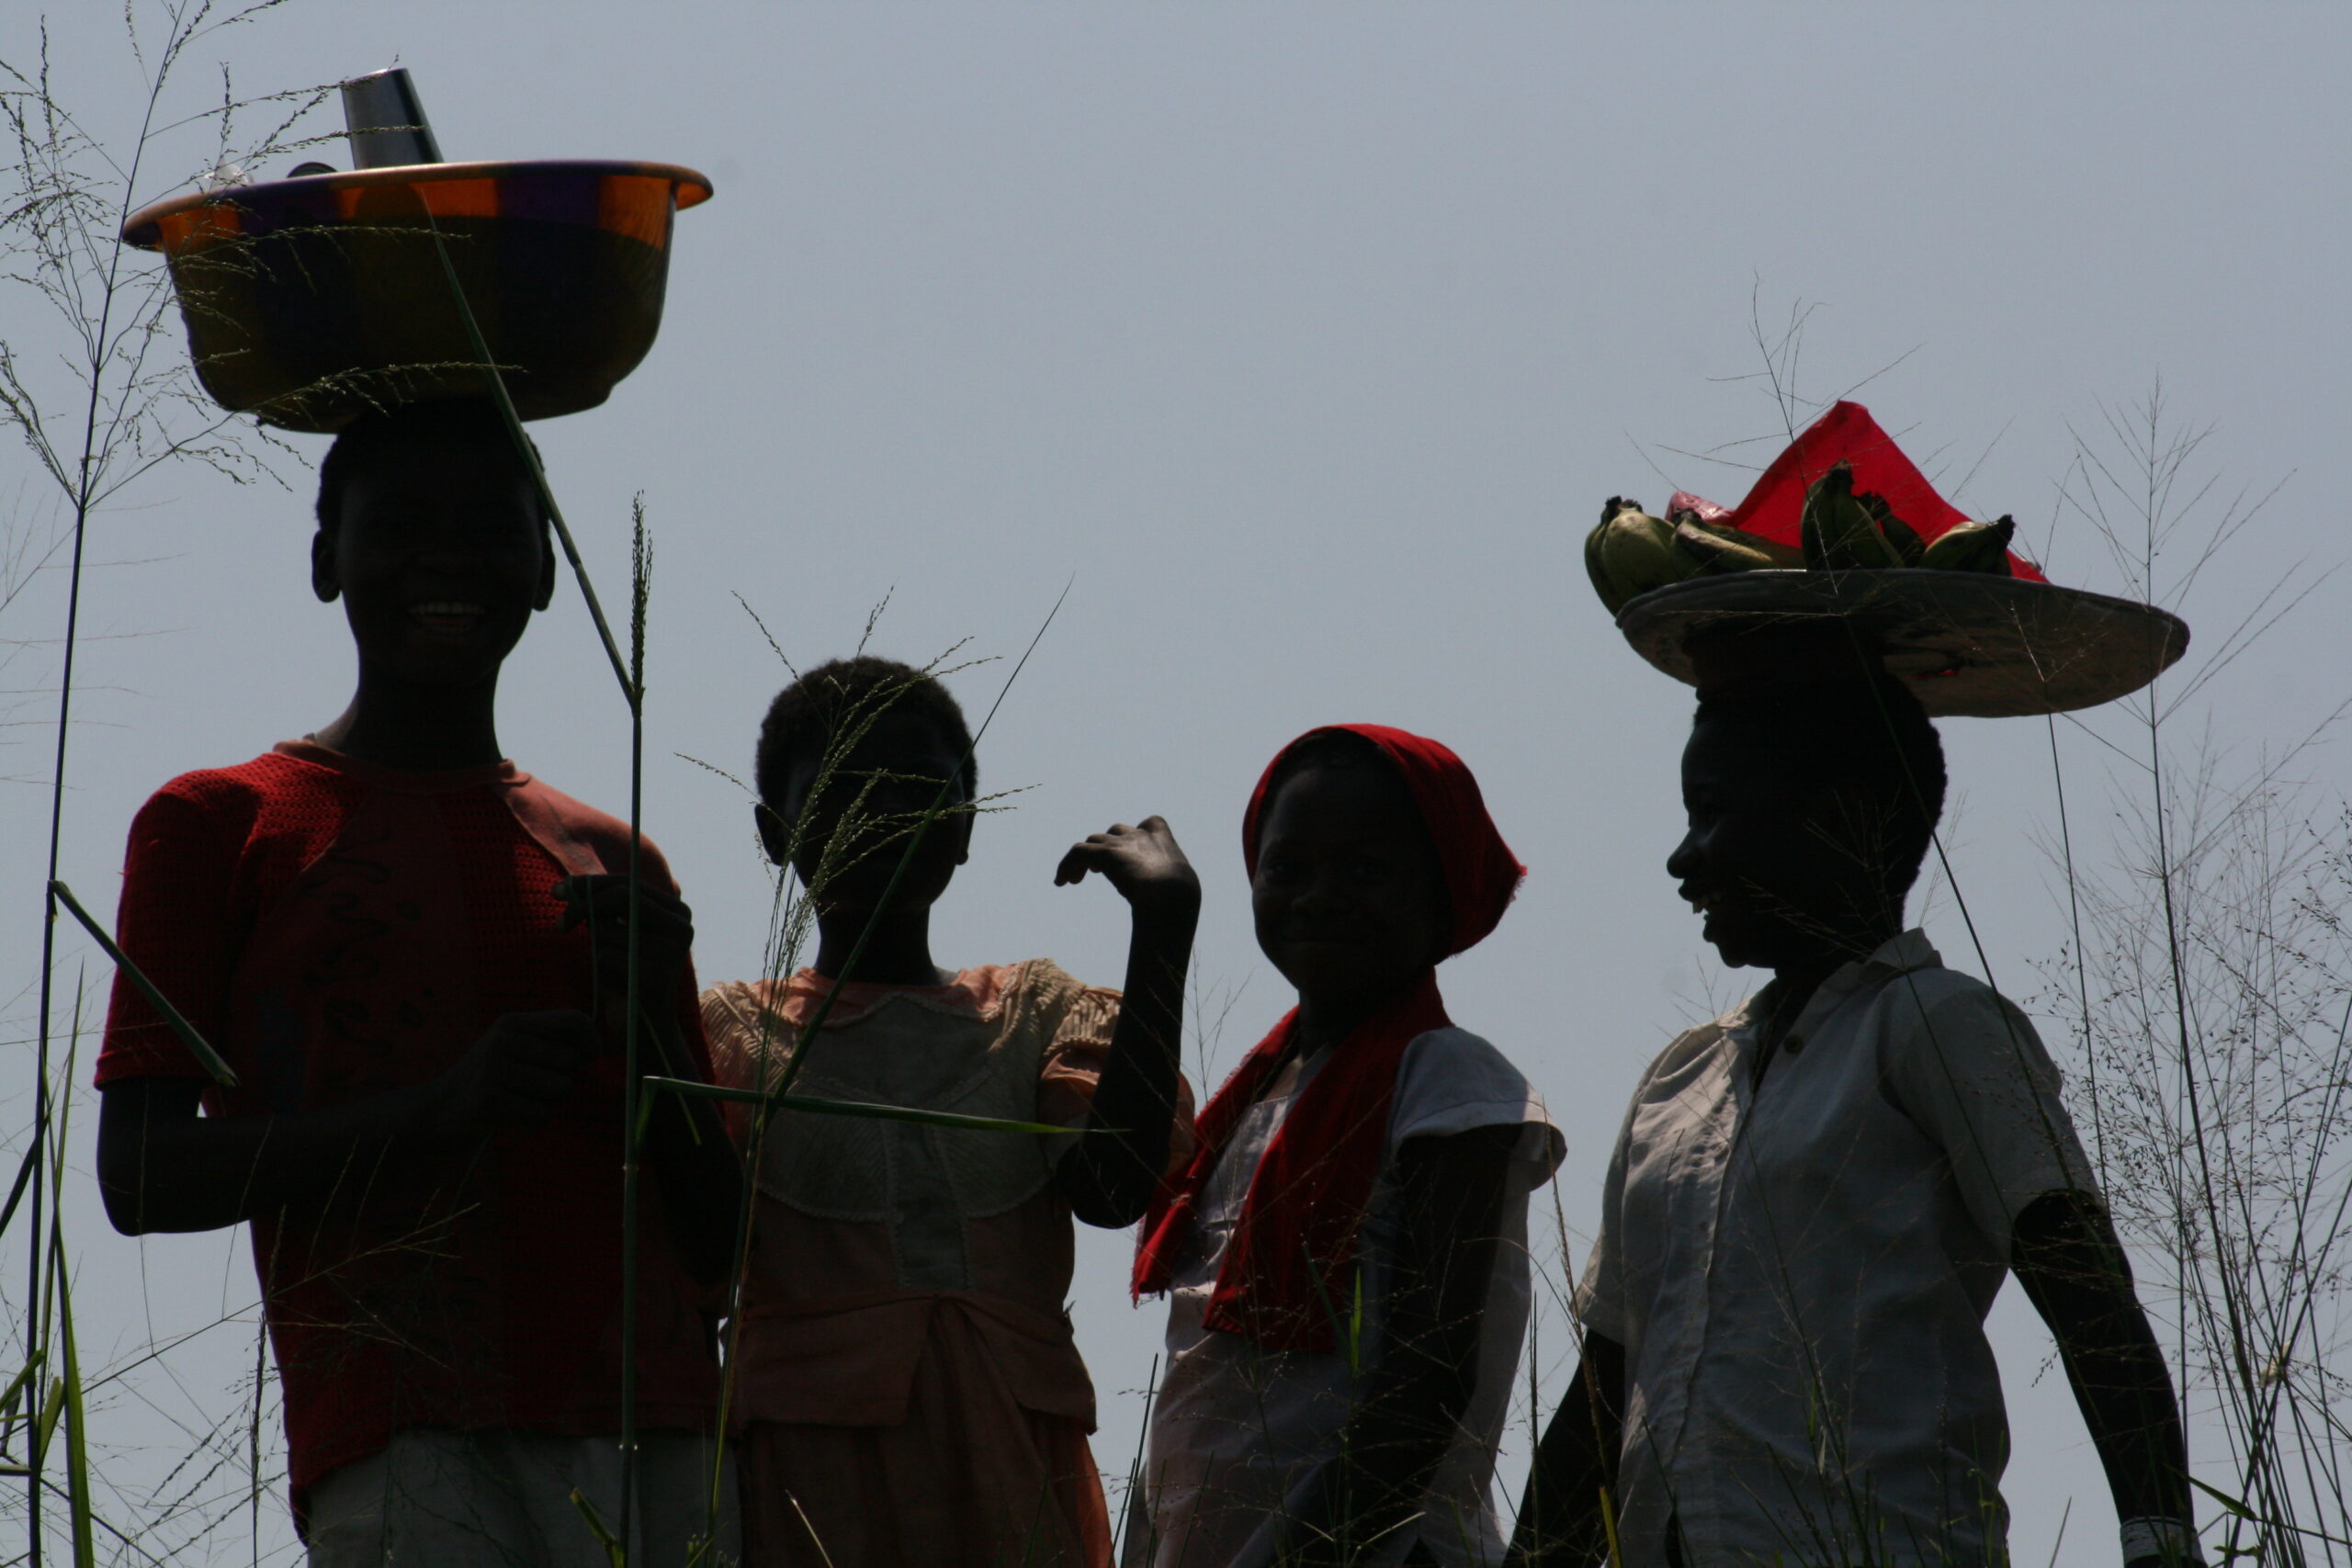 Bumba villagers with buckets on head